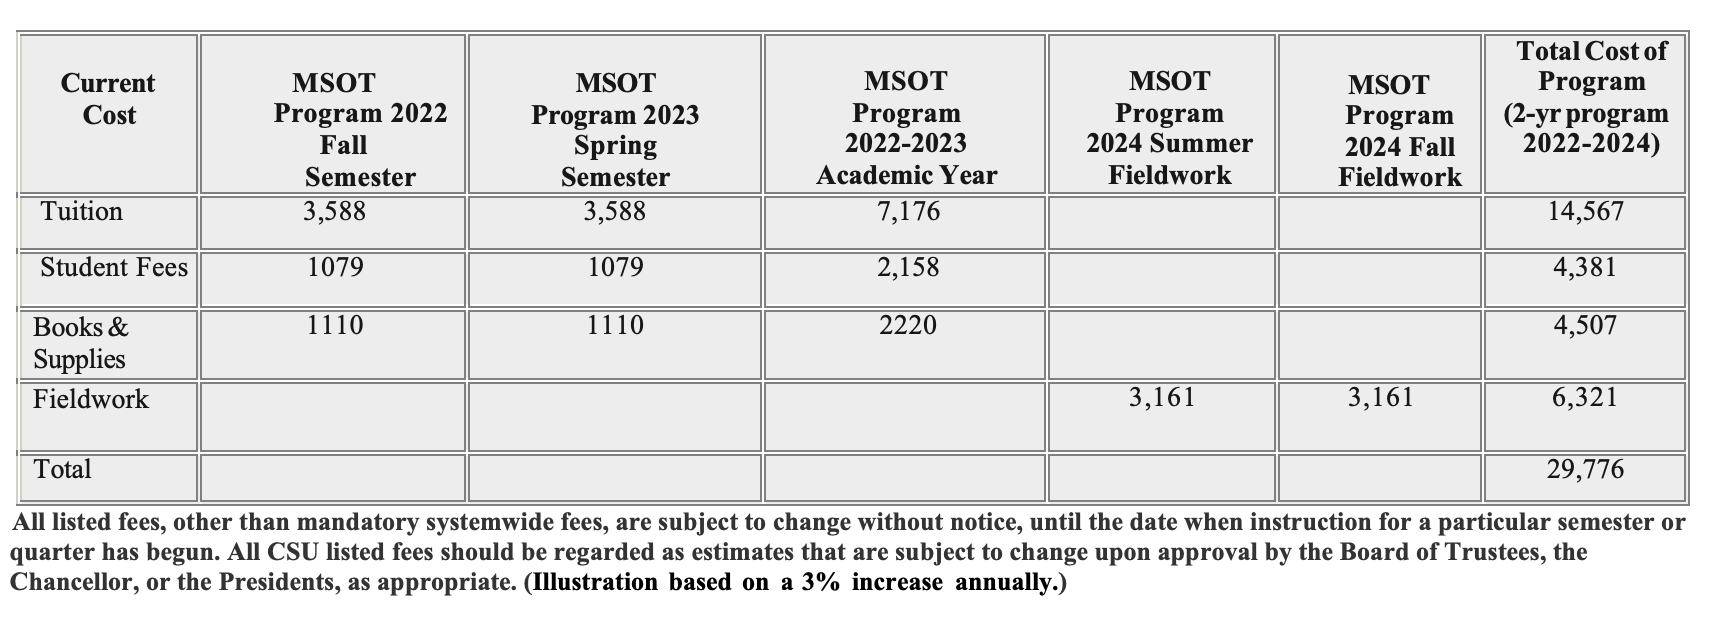 sample cost of attendance for academic years '22-'24